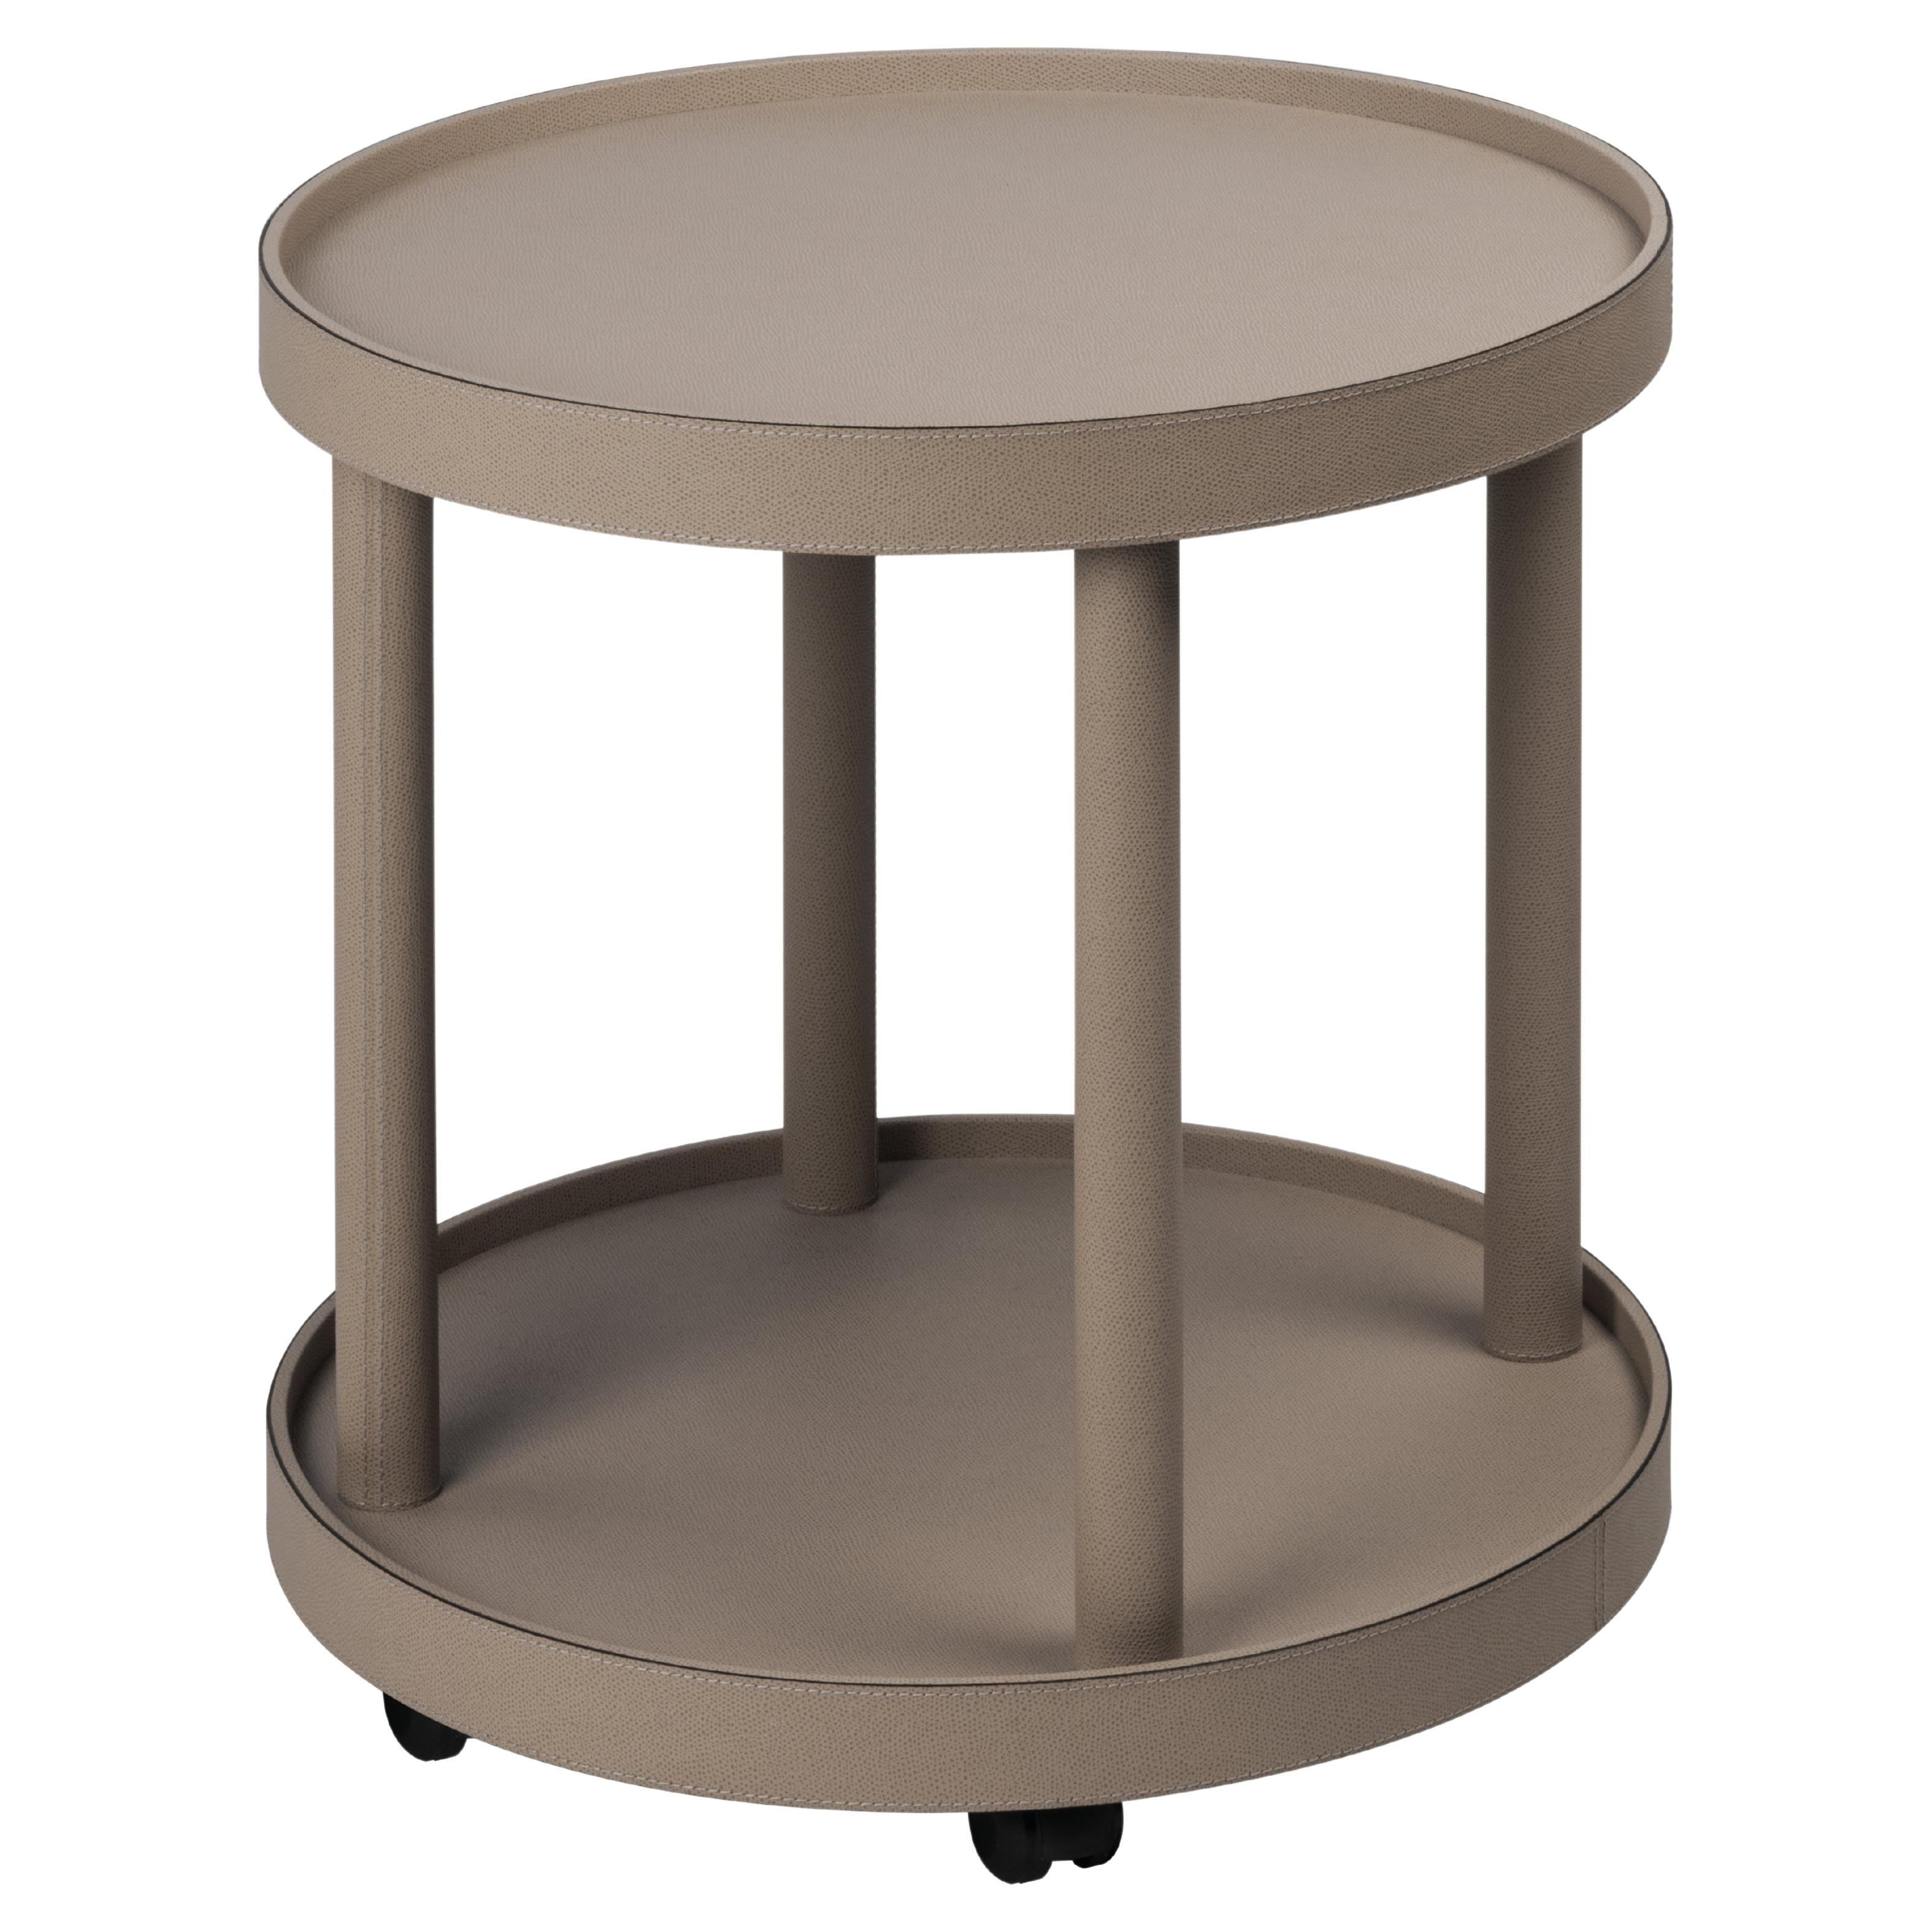 Metal James Servant Table by Gio Bagnara For Sale